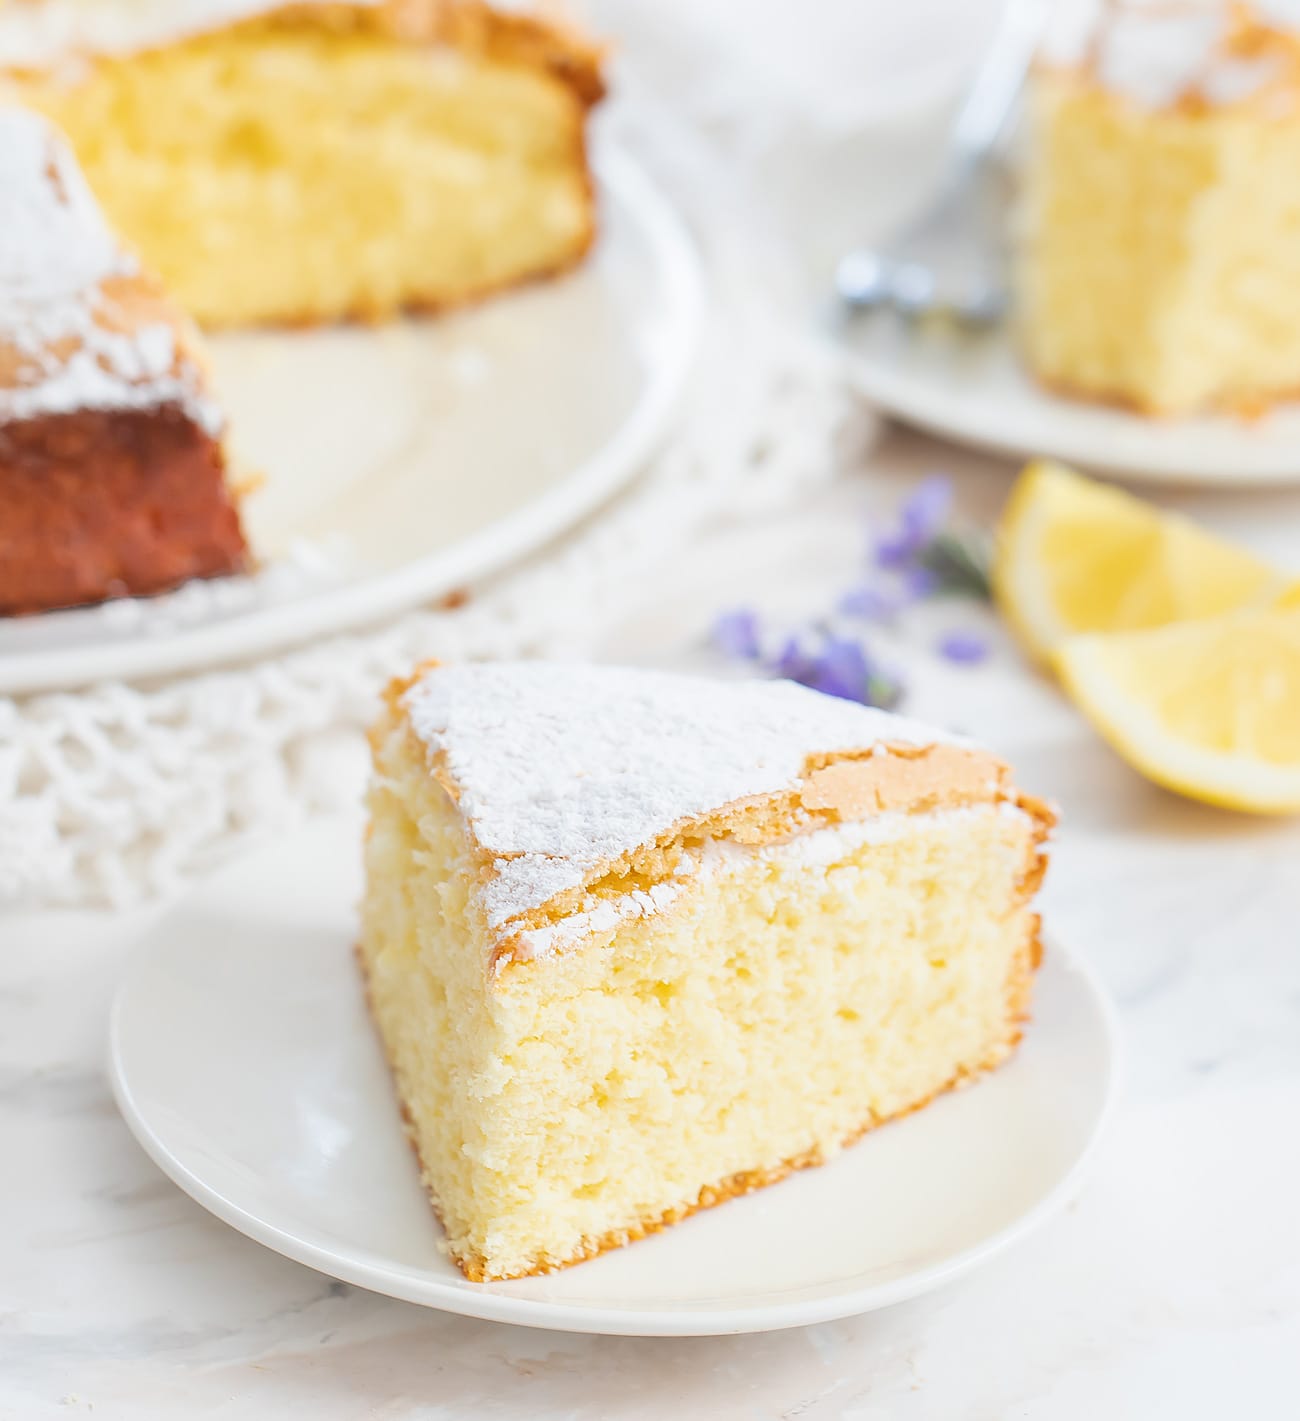 Lemon Cake with Cream Cheese frosting | Thula's Cake Lab